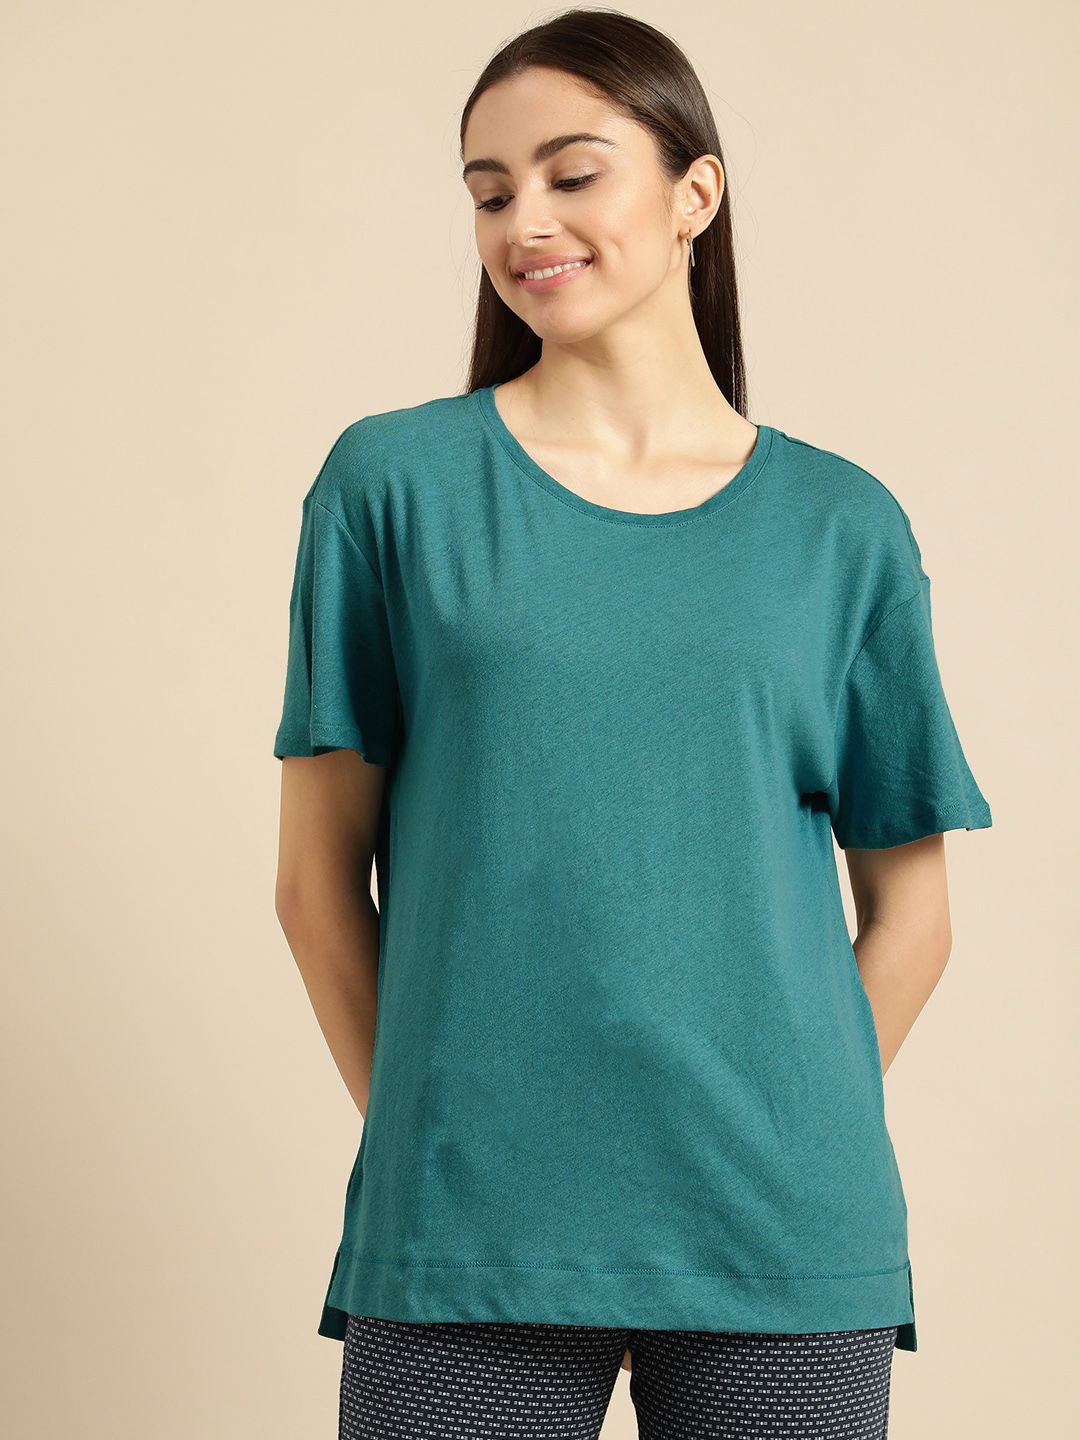 Triumph Women Teal Green Solid Knitted Lounge Tshirts Price in India